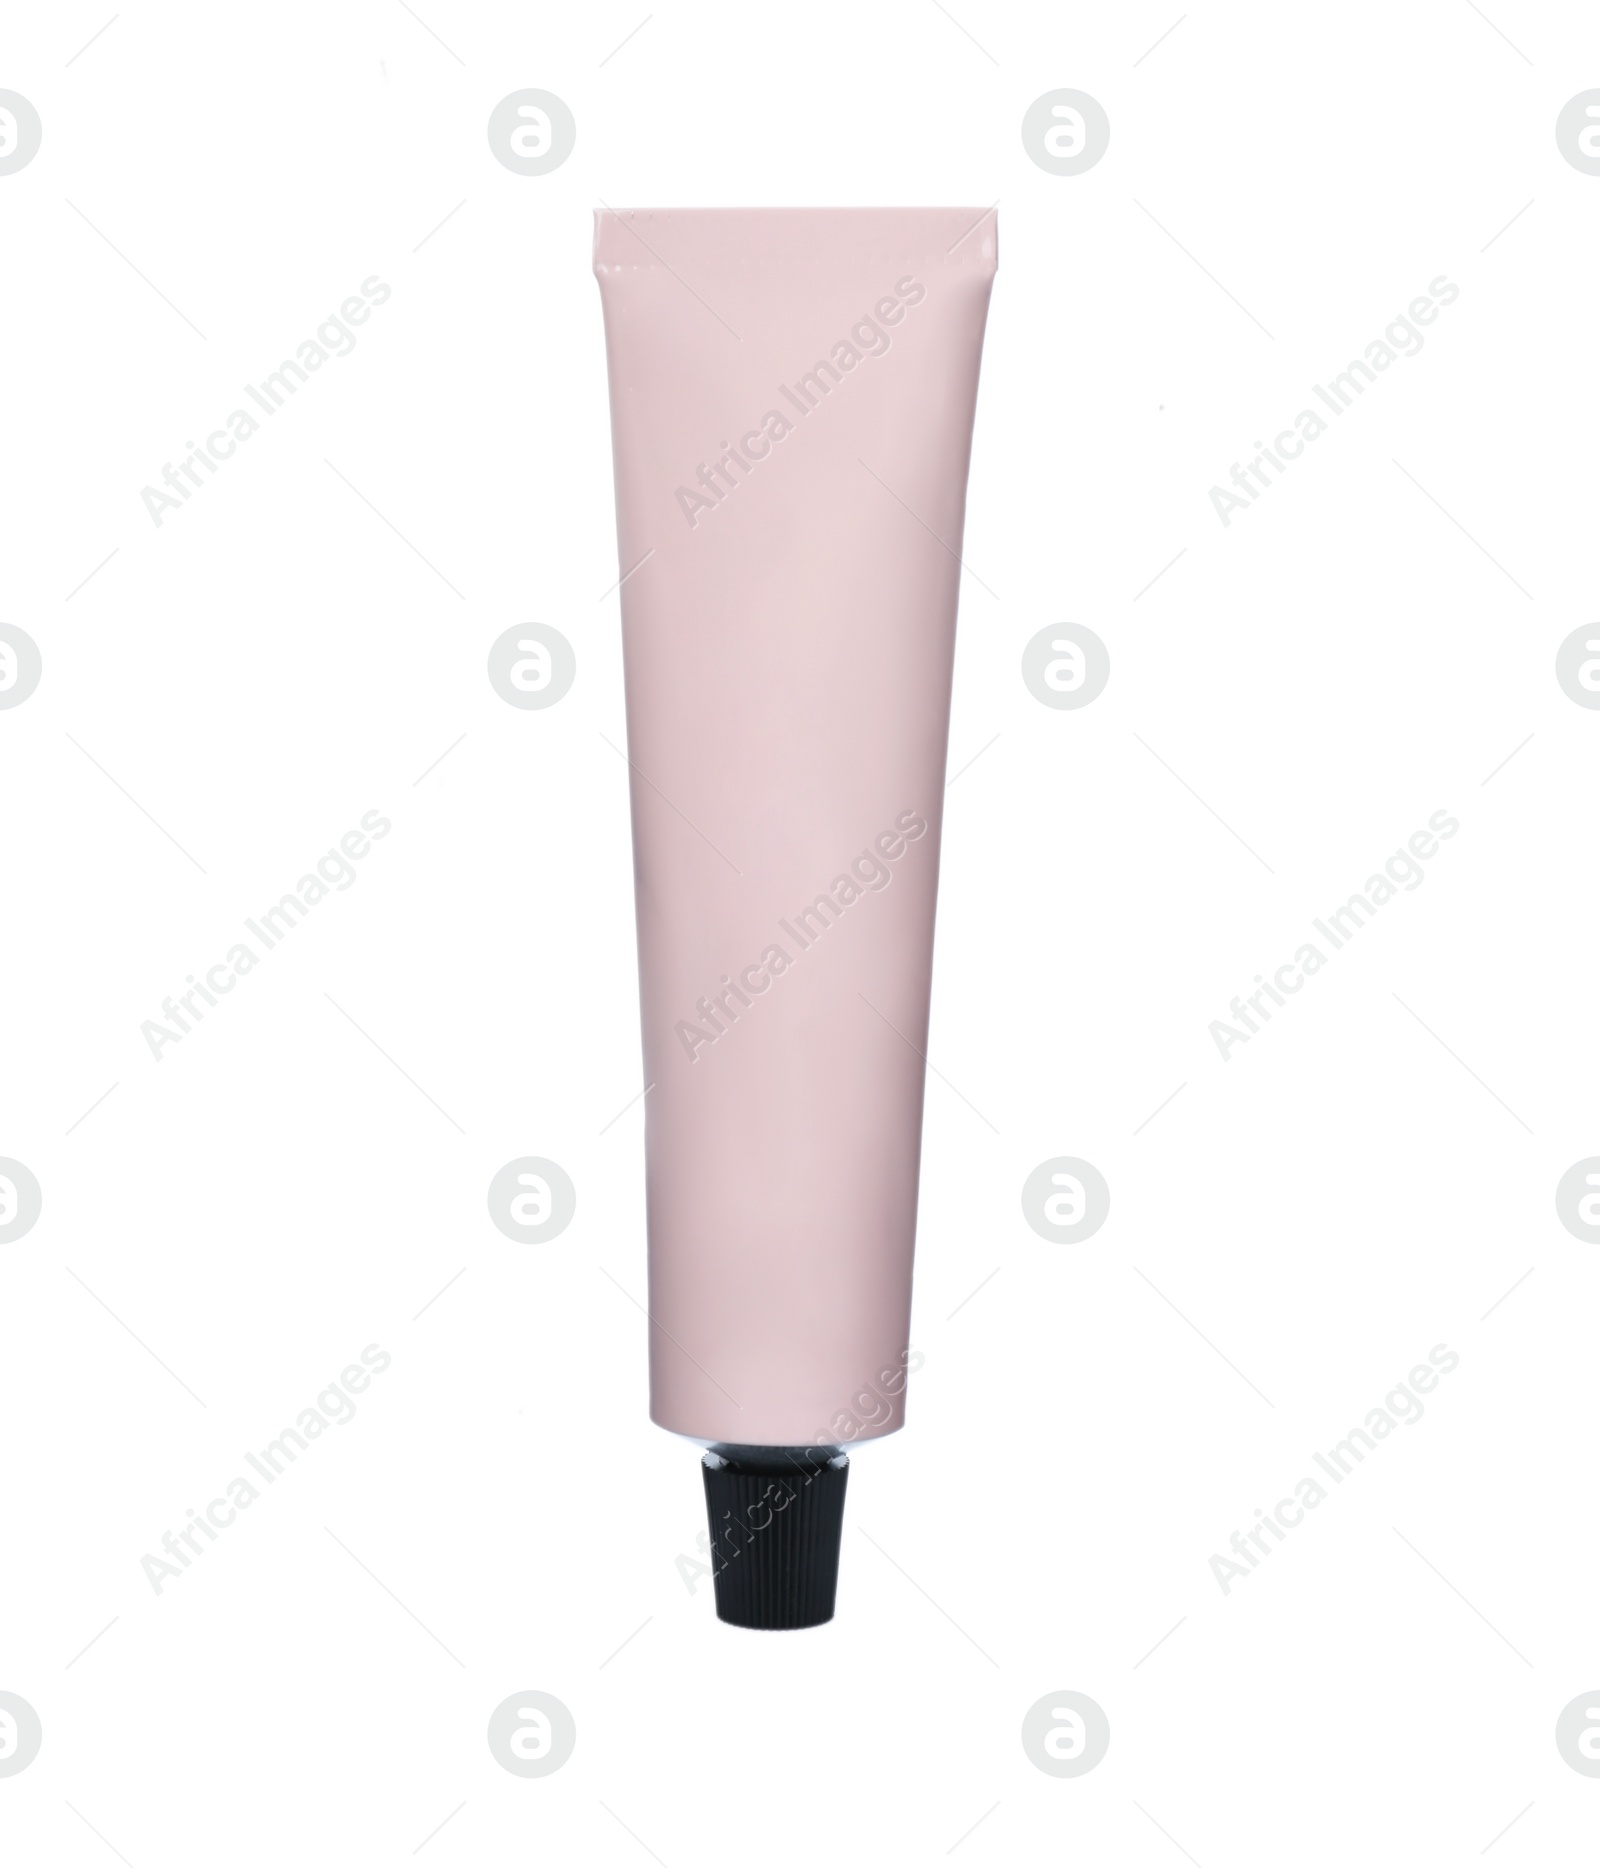 Photo of Light pink tube of hand cream isolated on white. Mockup for design